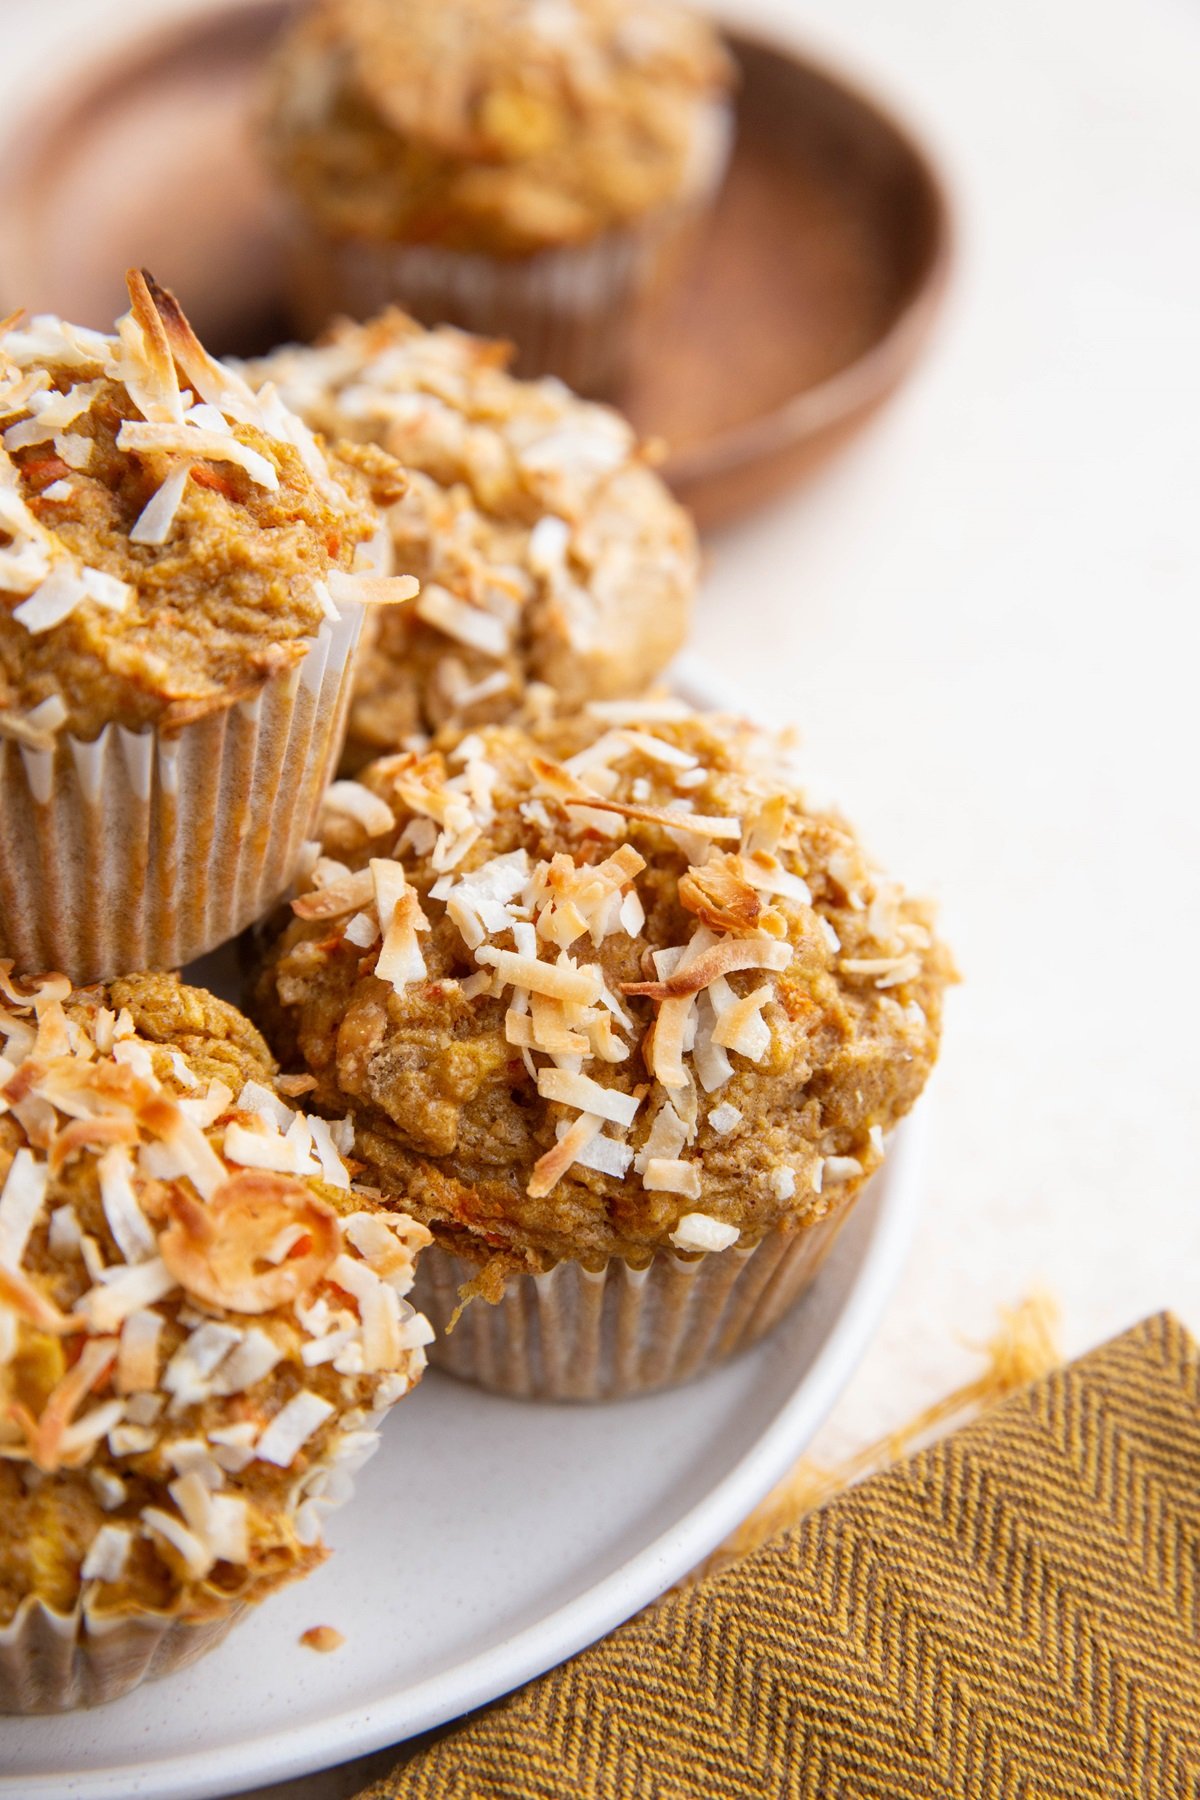 Plate of carrot muffins sprinkled with flaked coconut.